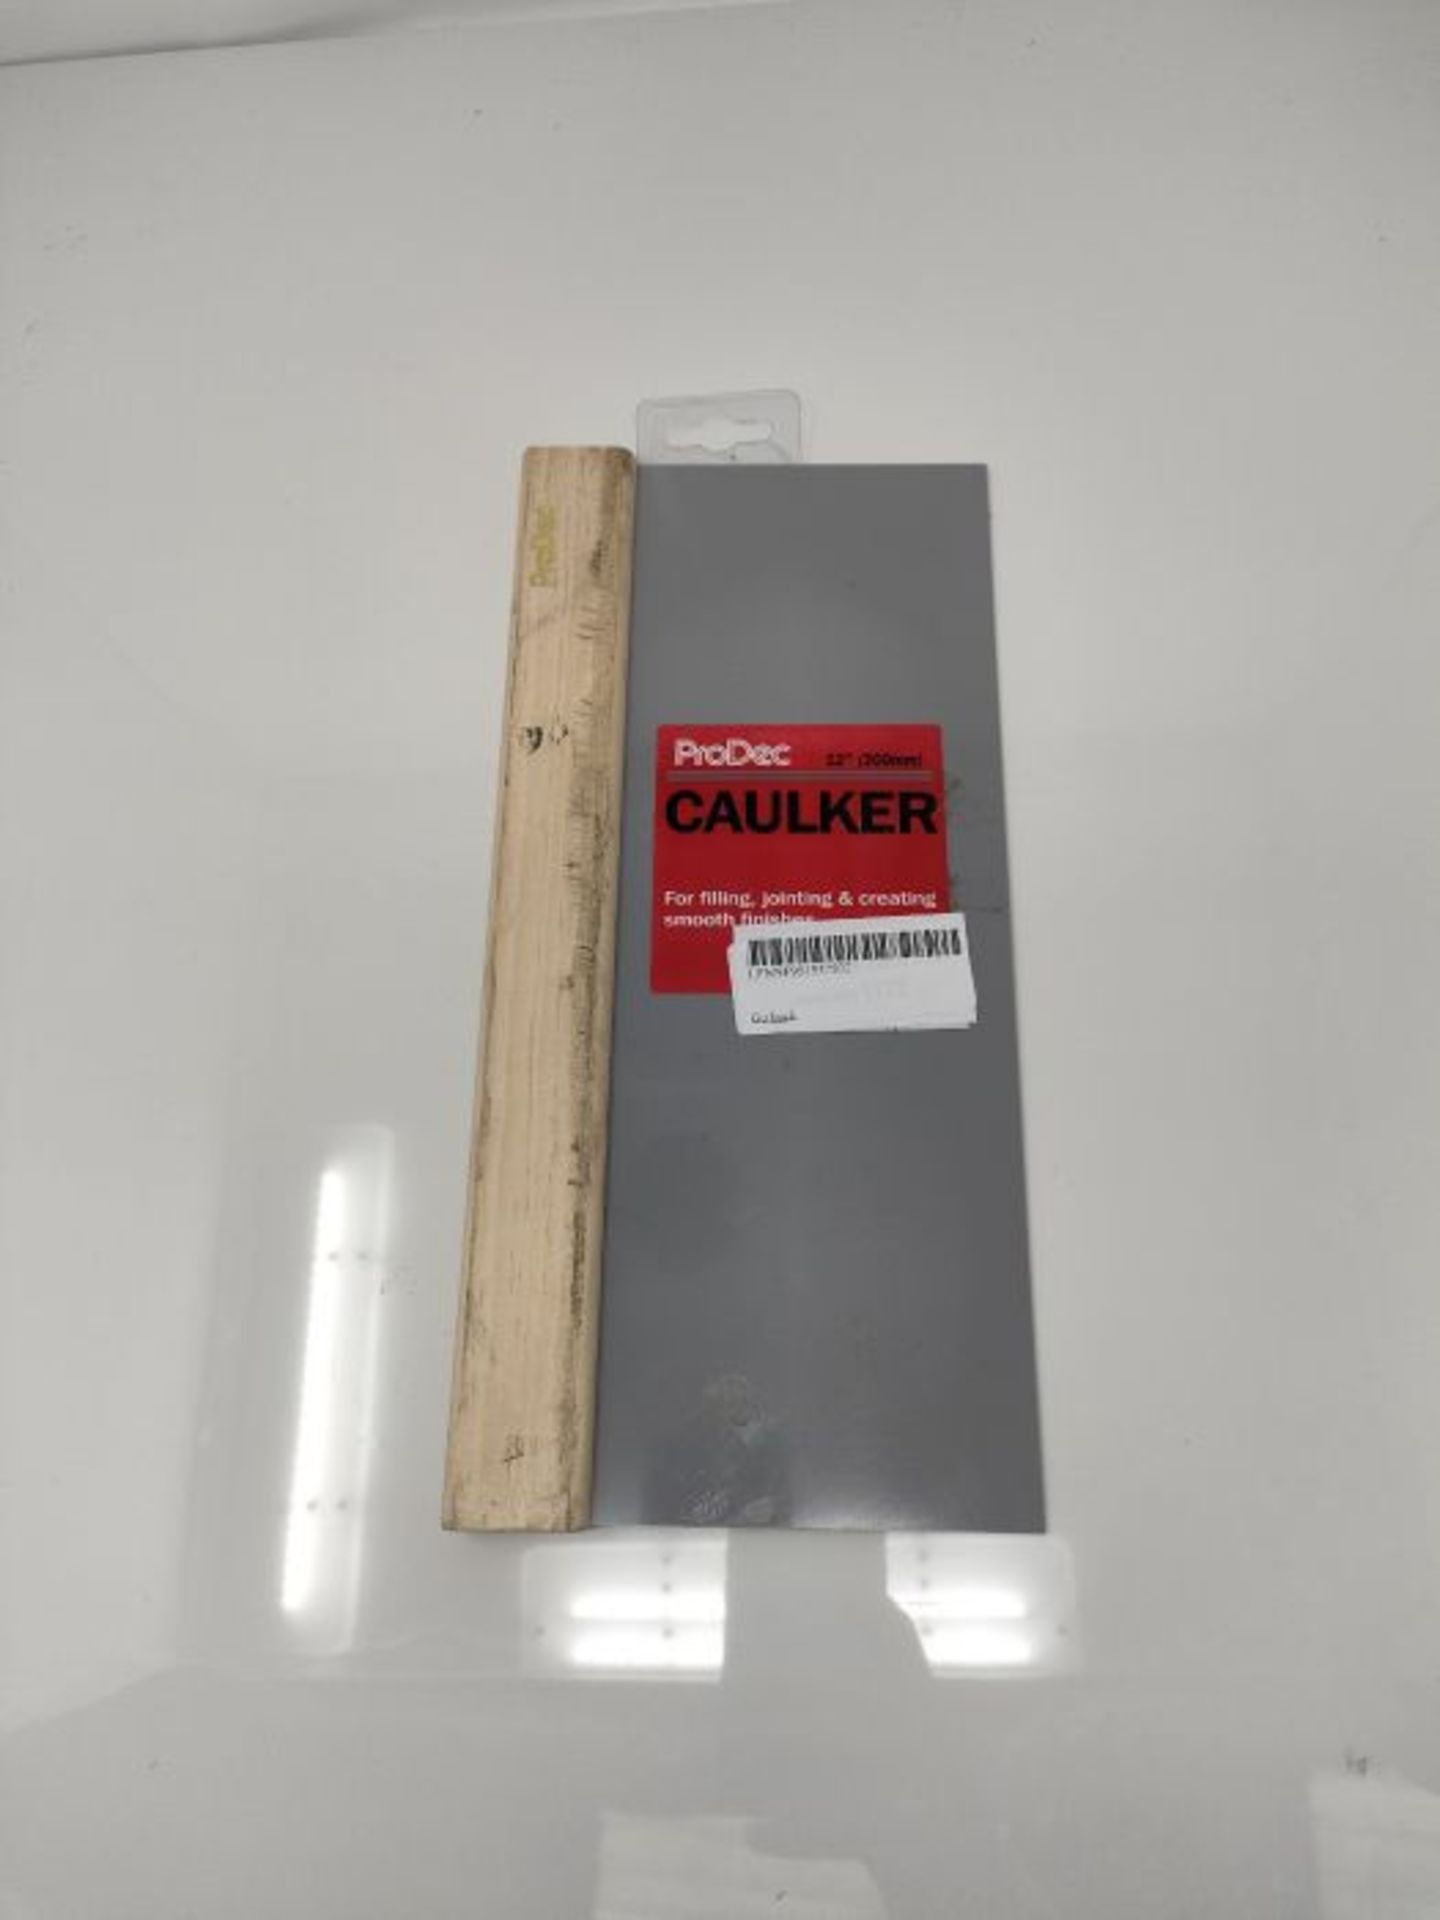 [INCOMPLETE] Prodec 12" (300mm) Caulker For Filling, Jointing & Finishing - Image 2 of 3